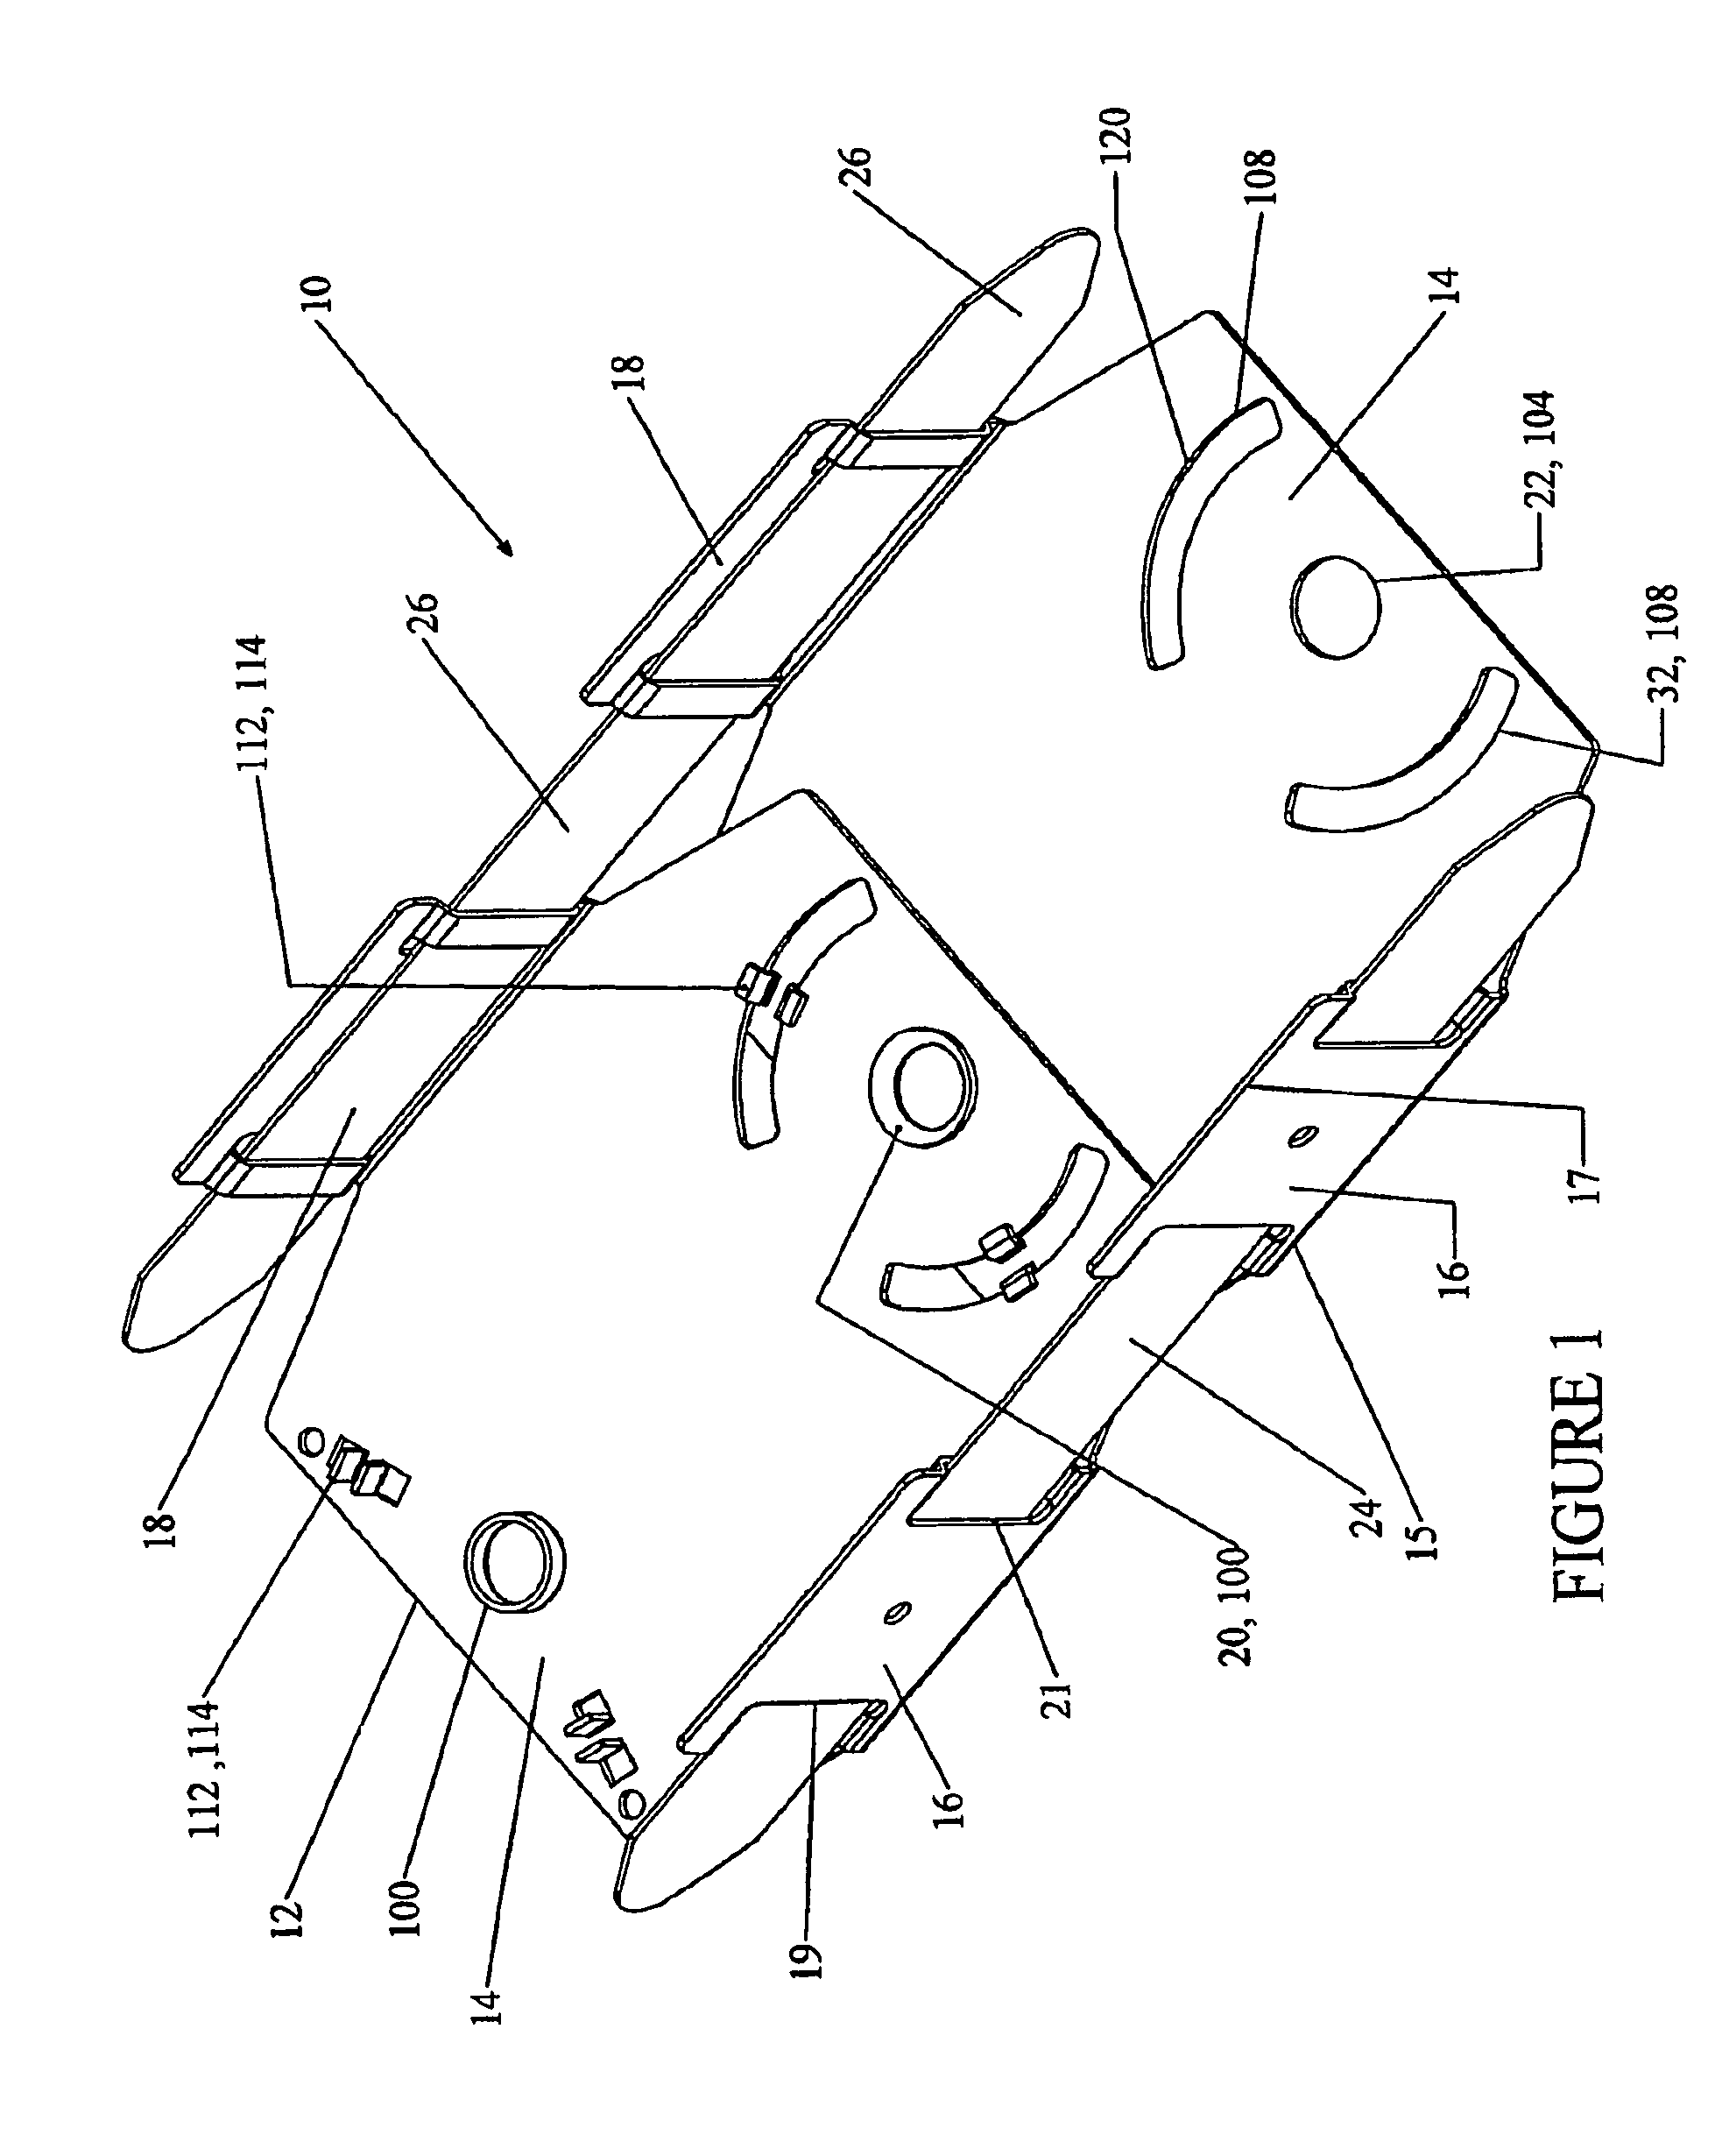 Apparatus and methods of forming a curved structure